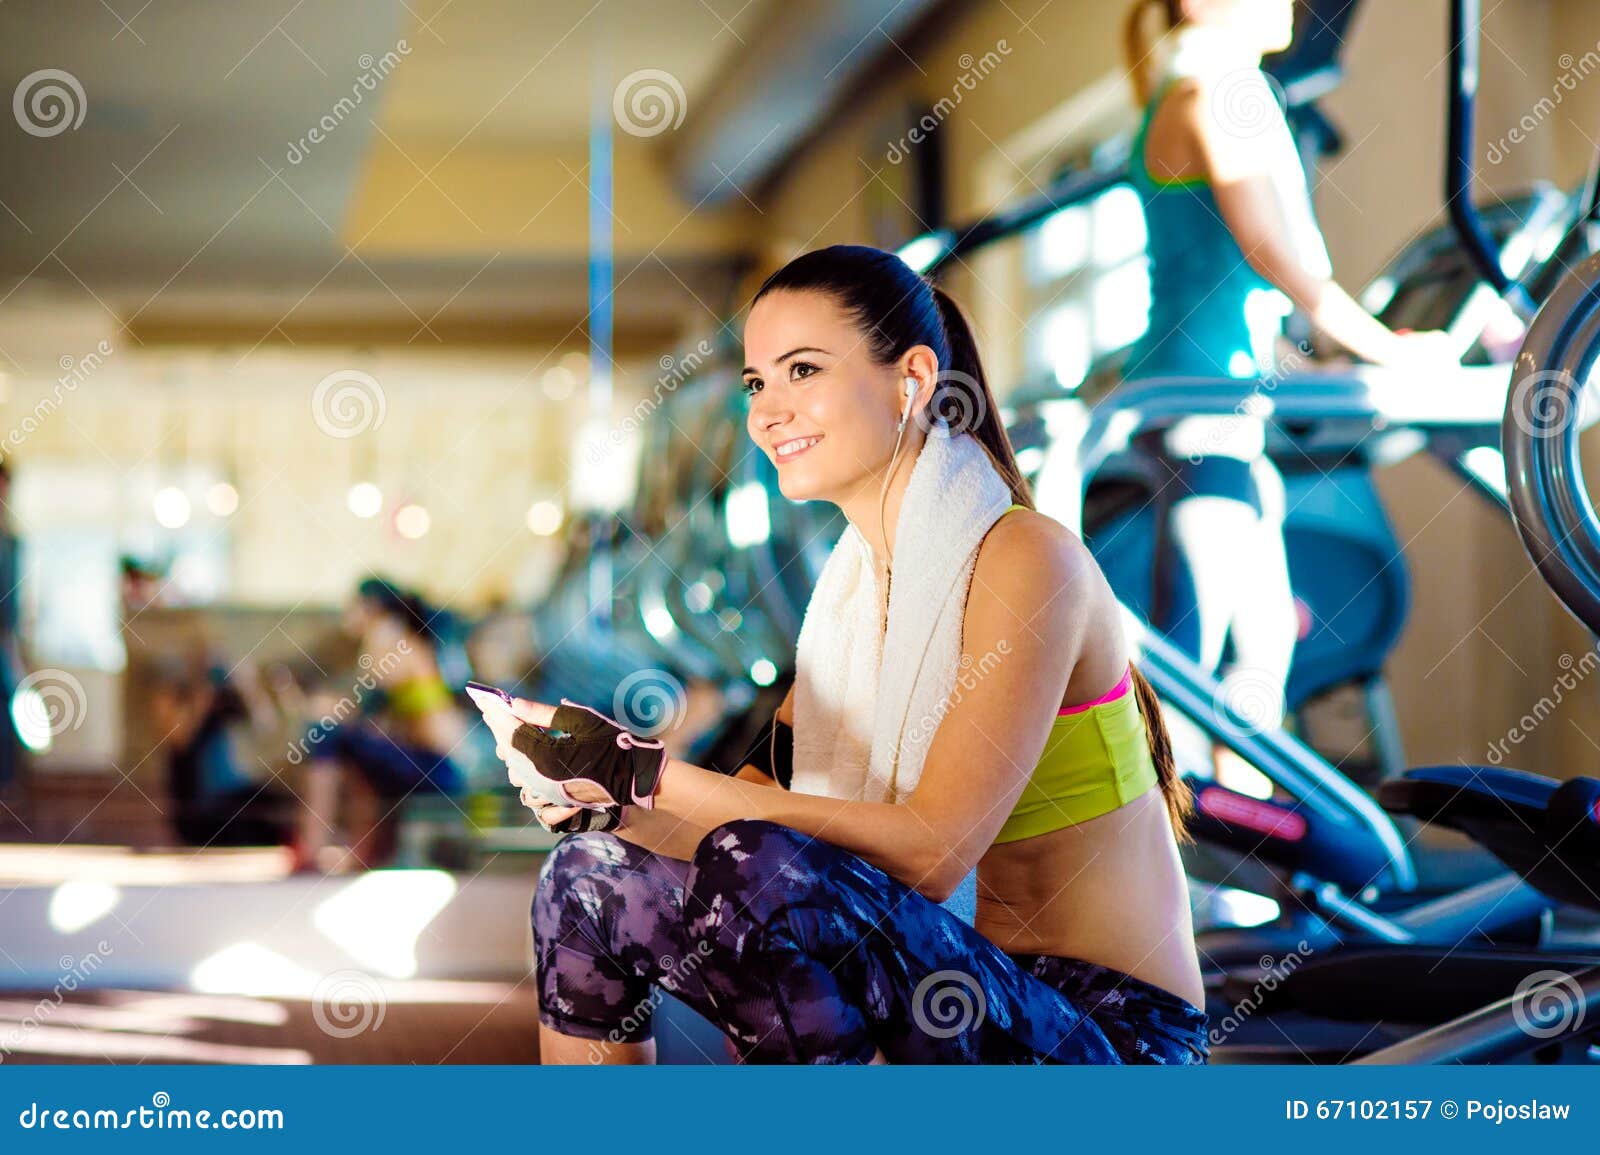 Attractive Fit Women in a Gym with Smart Phone Stock Image - Image of ...